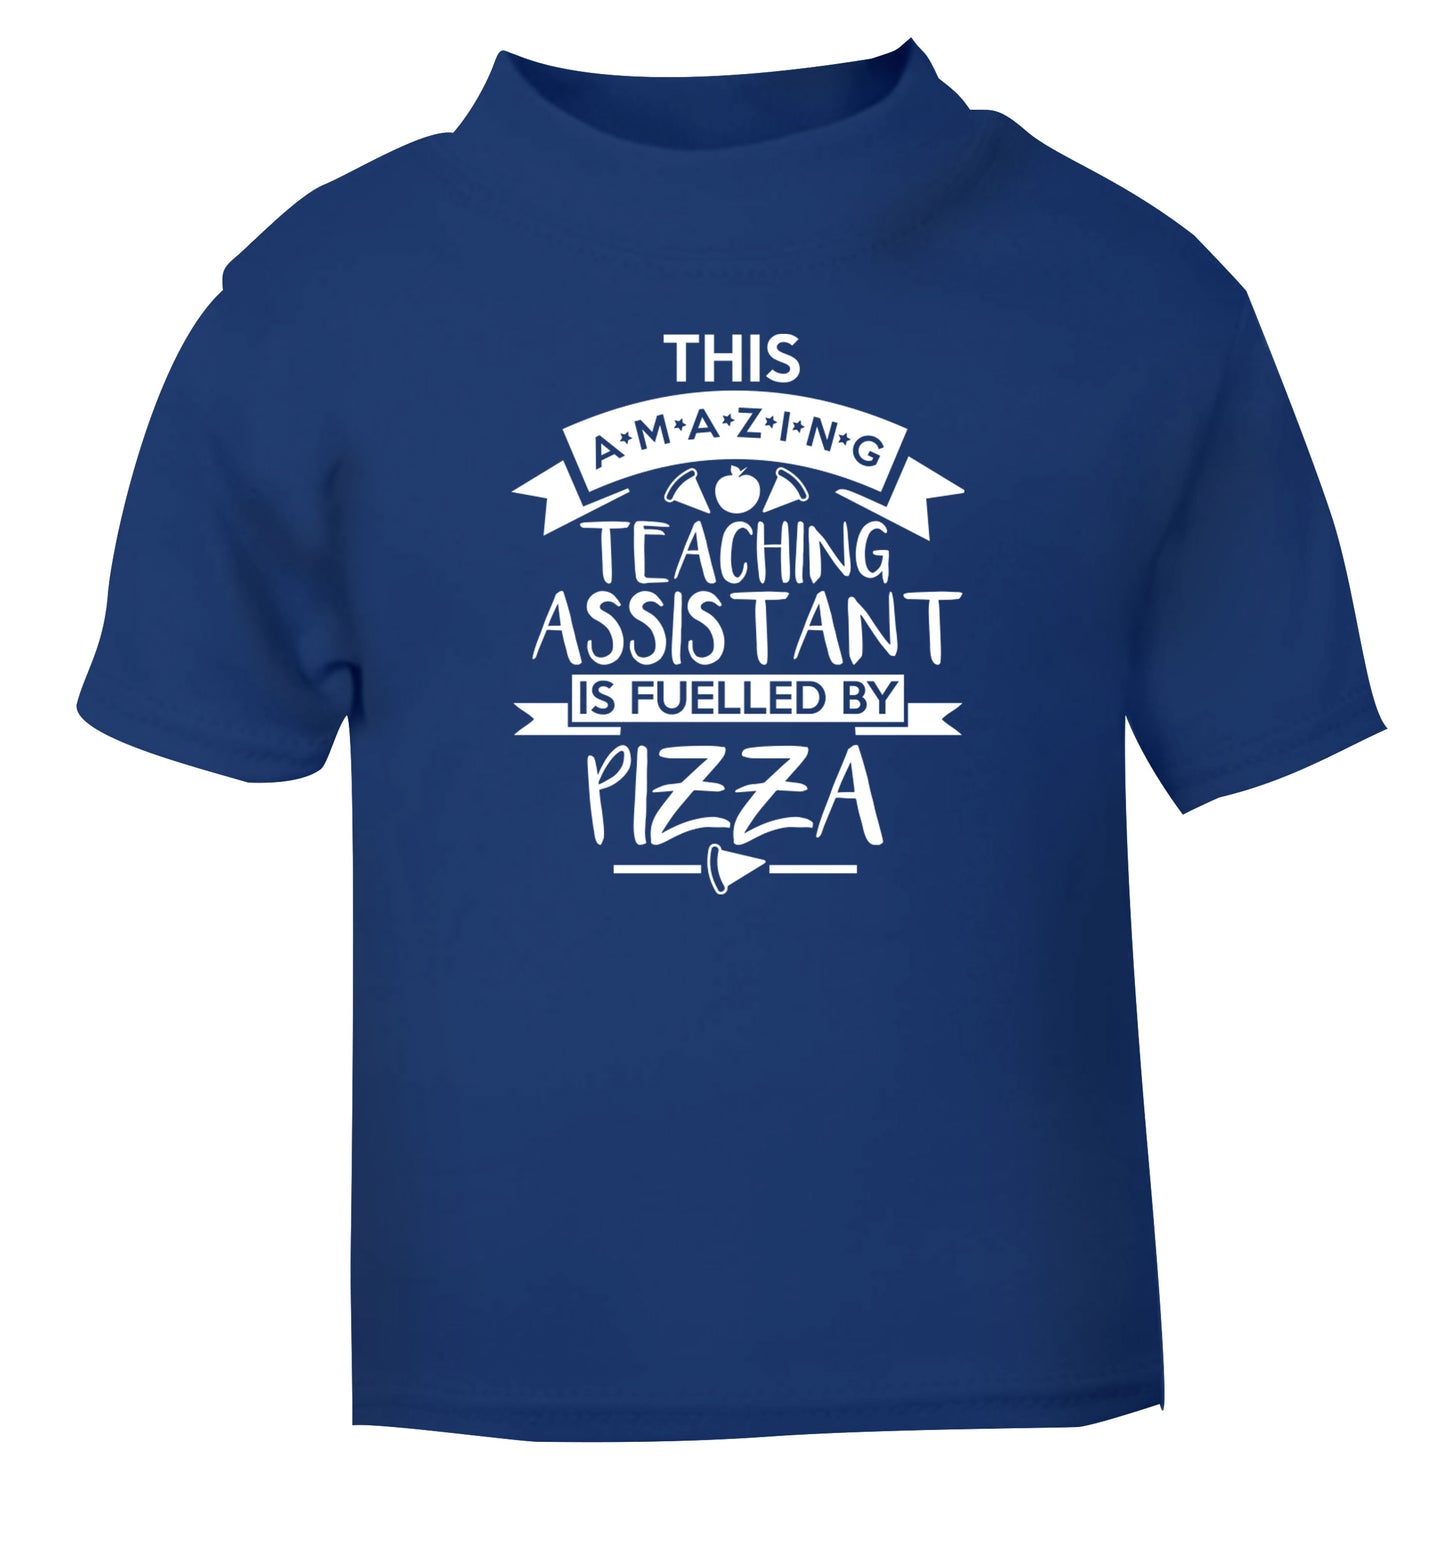 This amazing teaching assistant is fuelled by pizza blue Baby Toddler Tshirt 2 Years